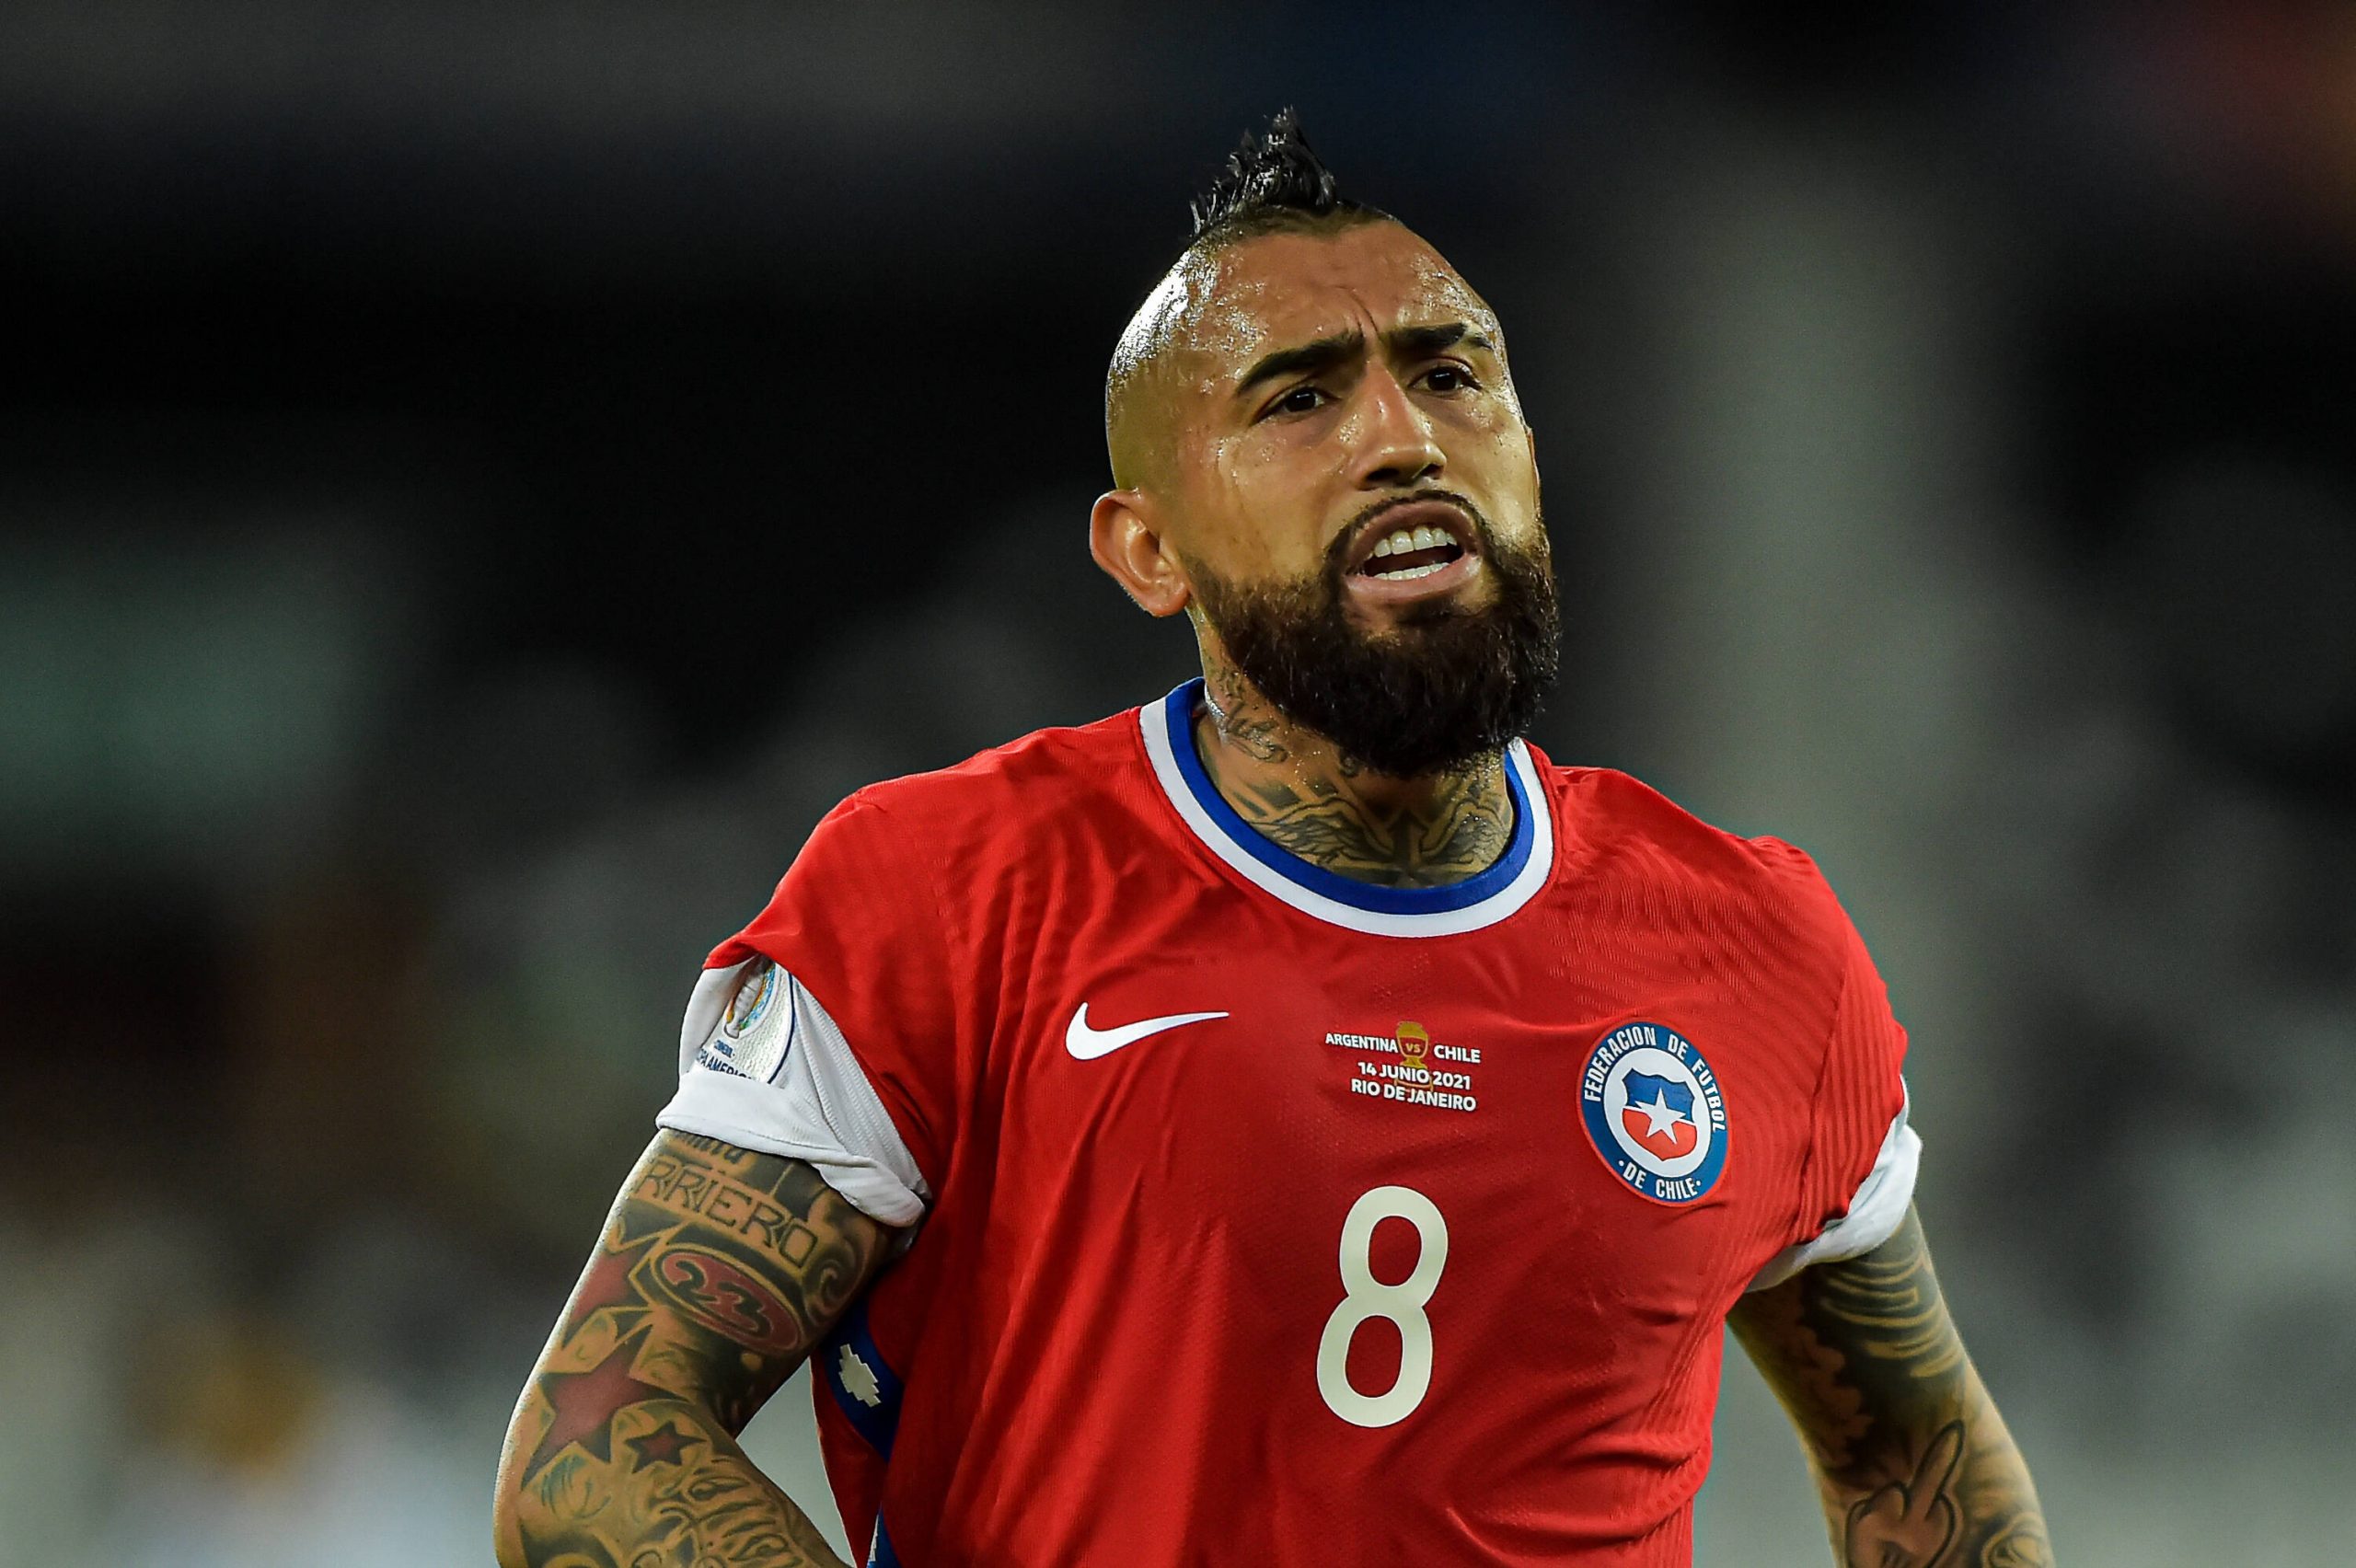 Vidal returns to Chile after 17 years of traveling in Europe and Brazil